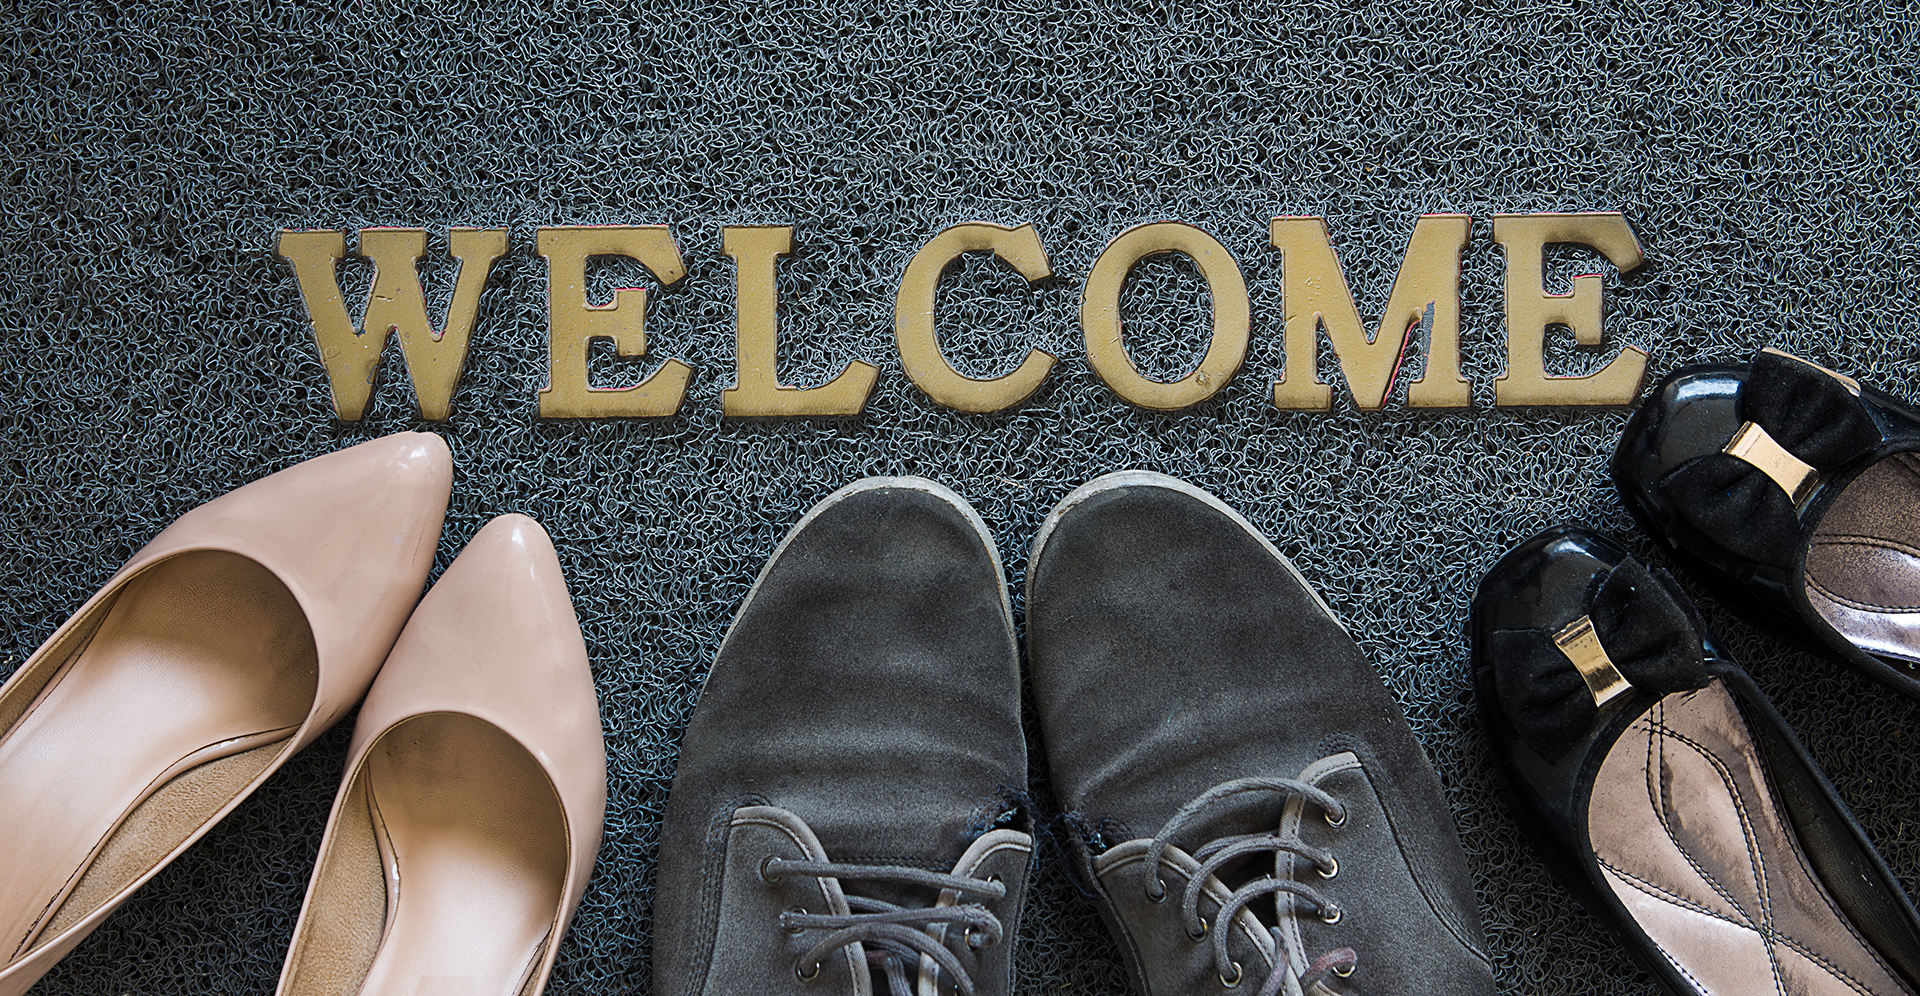 A welcome mat with three pairs of shoes pointing to the WELCOME text